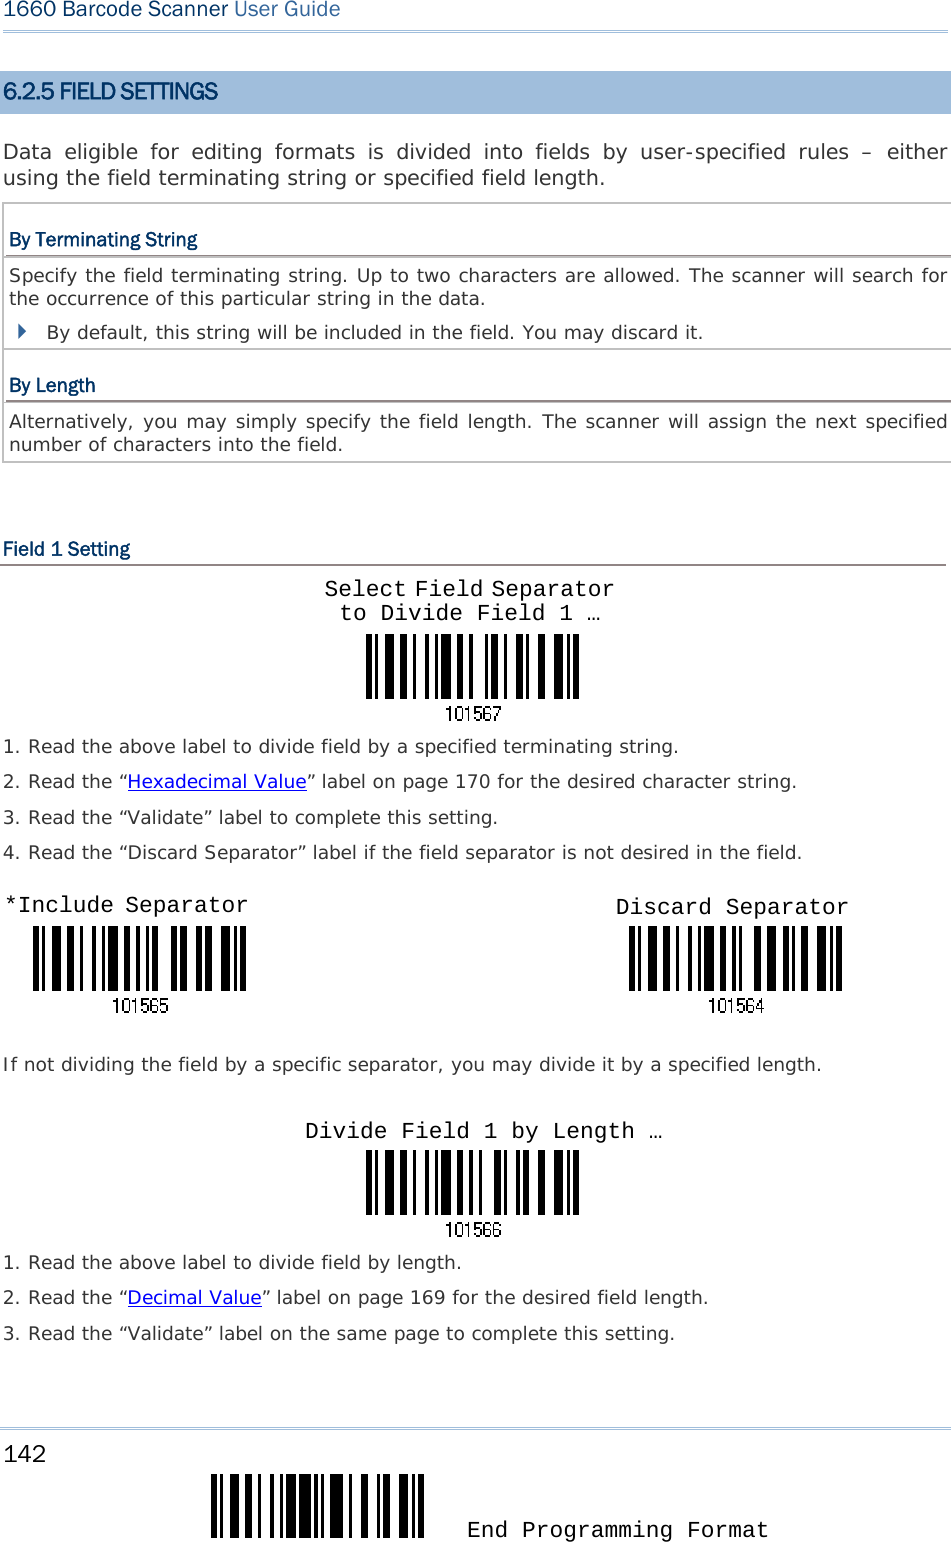 142  End Programming Format 1660 Barcode Scanner User Guide  6.2.5 FIELD SETTINGS Data eligible for editing formats is divided into fields by user-specified rules – either using the field terminating string or specified field length. By Terminating String Specify the field terminating string. Up to two characters are allowed. The scanner will search for the occurrence of this particular string in the data.   By default, this string will be included in the field. You may discard it. By Length Alternatively, you may simply specify the field length. The scanner will assign the next specified number of characters into the field.   Field 1 Setting    1. Read the above label to divide field by a specified terminating string. 2. Read the “Hexadecimal Value” label on page 170 for the desired character string.  3. Read the “Validate” label to complete this setting. 4. Read the “Discard Separator” label if the field separator is not desired in the field.                                 If not dividing the field by a specific separator, you may divide it by a specified length.    1. Read the above label to divide field by length. 2. Read the “Decimal Value” label on page 169 for the desired field length. 3. Read the “Validate” label on the same page to complete this setting. Select Field Separator to Divide Field 1 … *Include Separator  Discard Separator Divide Field 1 by Length …